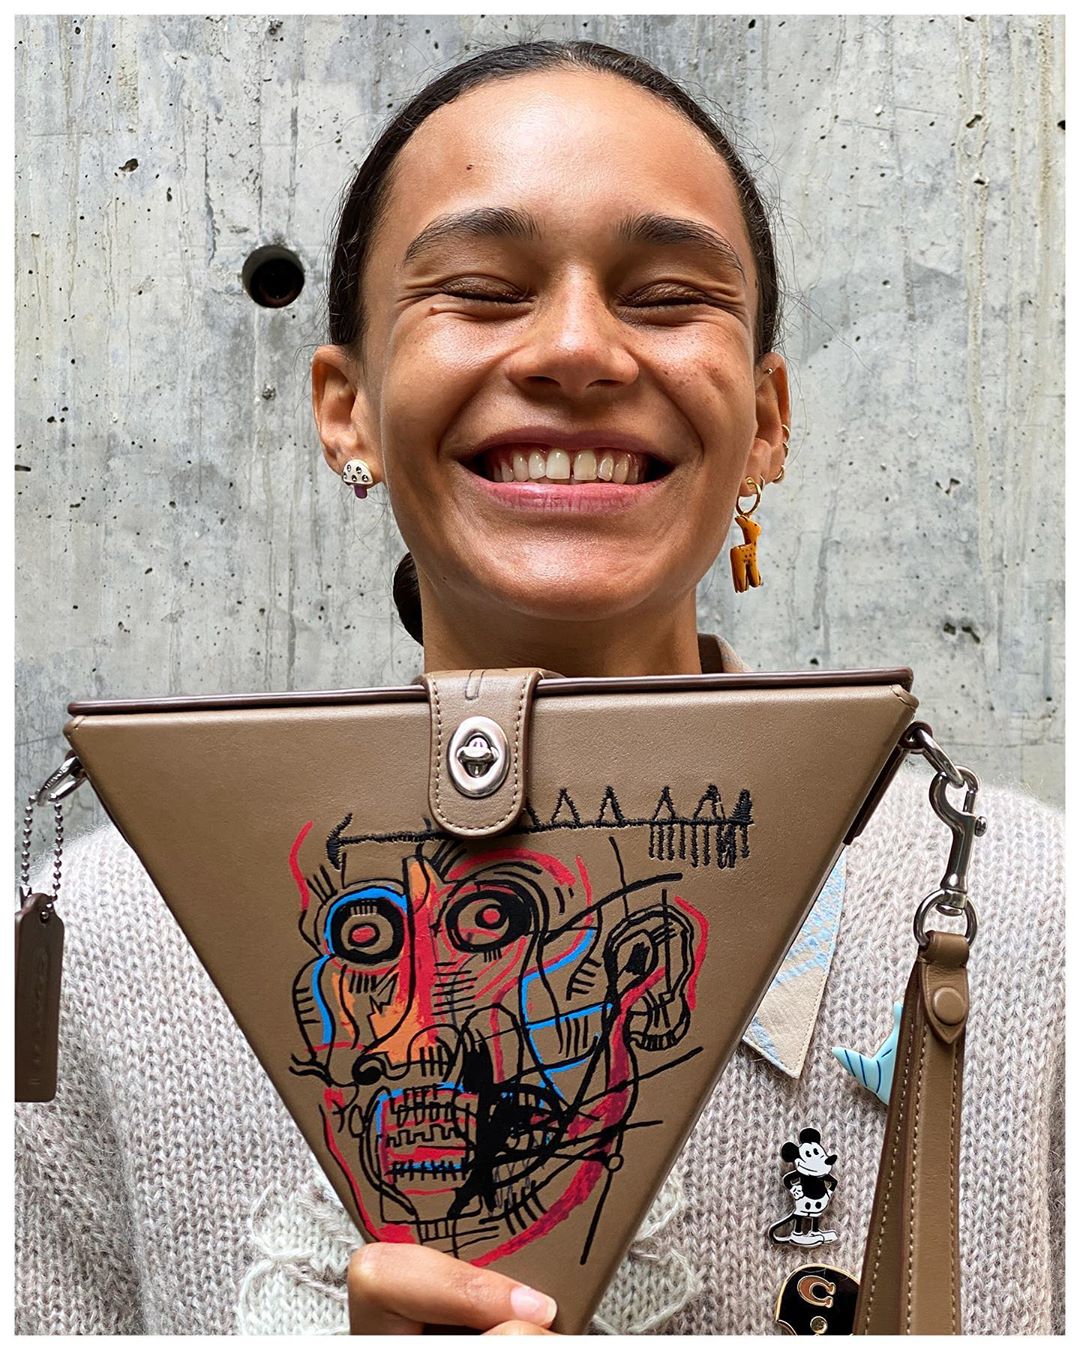 Coach - Optimism in practice. New York-based model #BinxWalton is all smiles for #CoachForever’s new and vintage styles. (Swipe right for some fresh flowers.) 
.
.
Binx wears a light color palette wit...